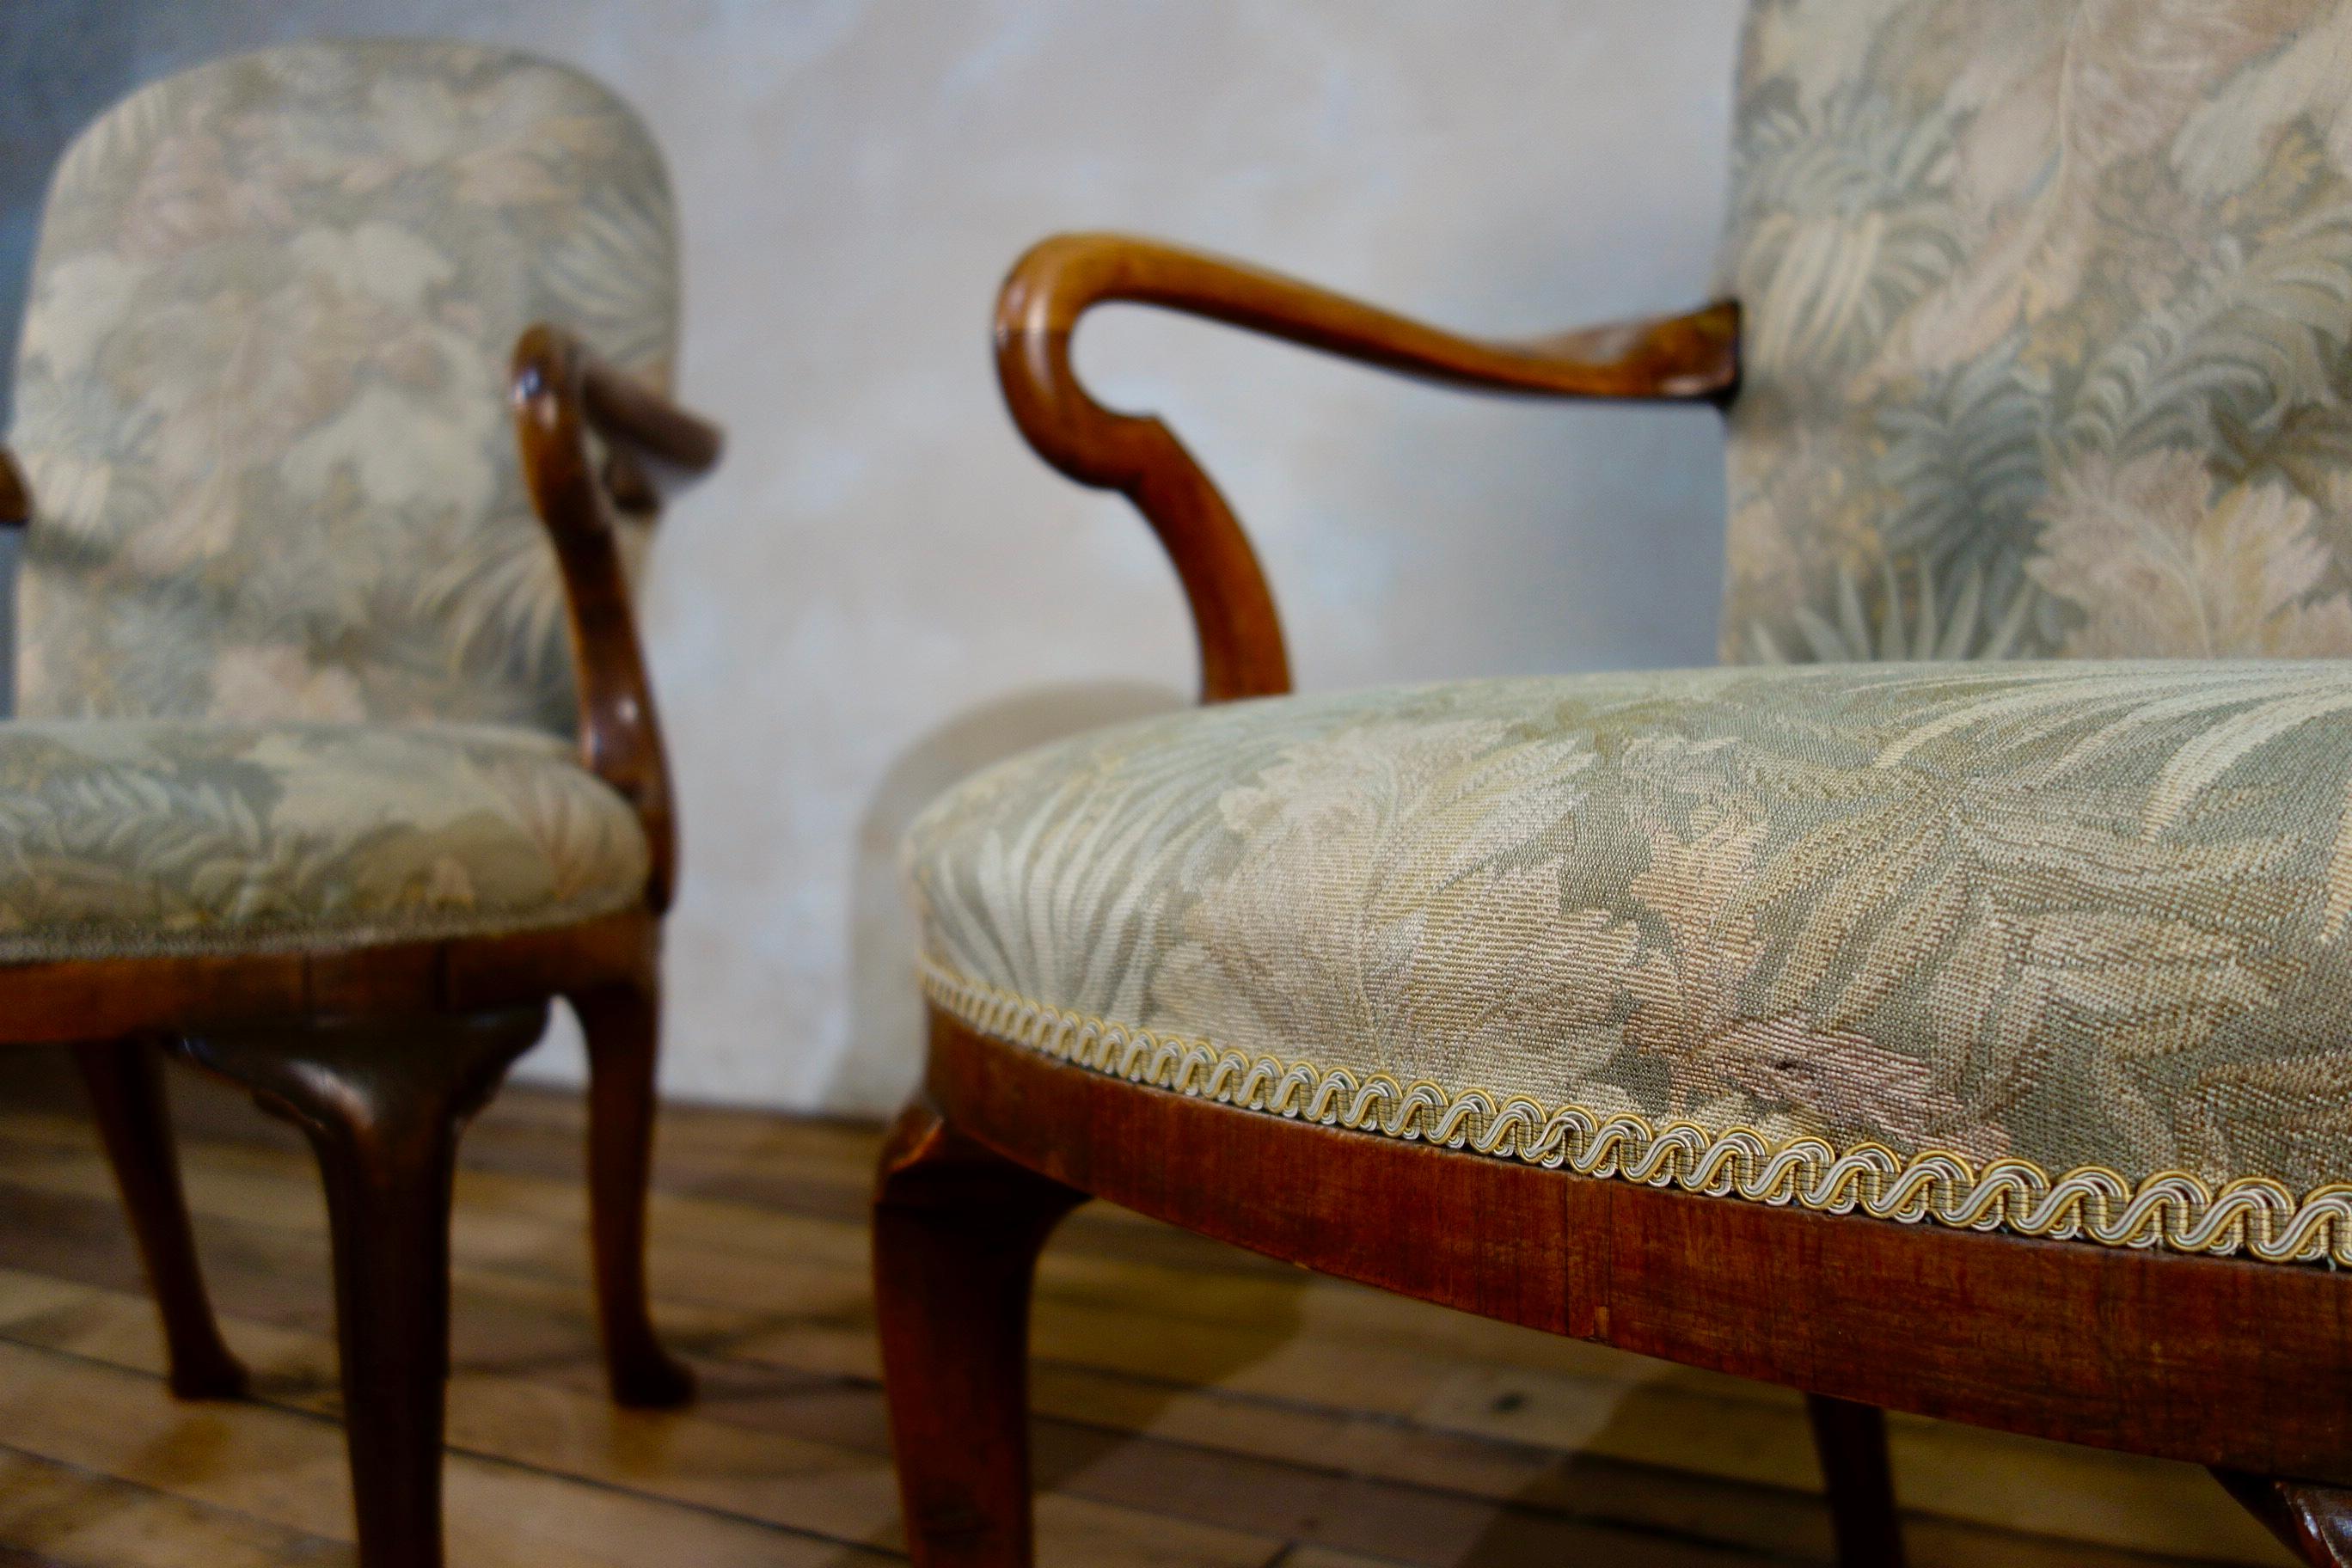 A pair of George I style armchairs, featuring walnut shepherd crook arms and rounded upholstered back. Raised on raking rear legs with front cabriole legs - sat on pad feet.    This is one pair from a set of three pairs of identical chairs, with